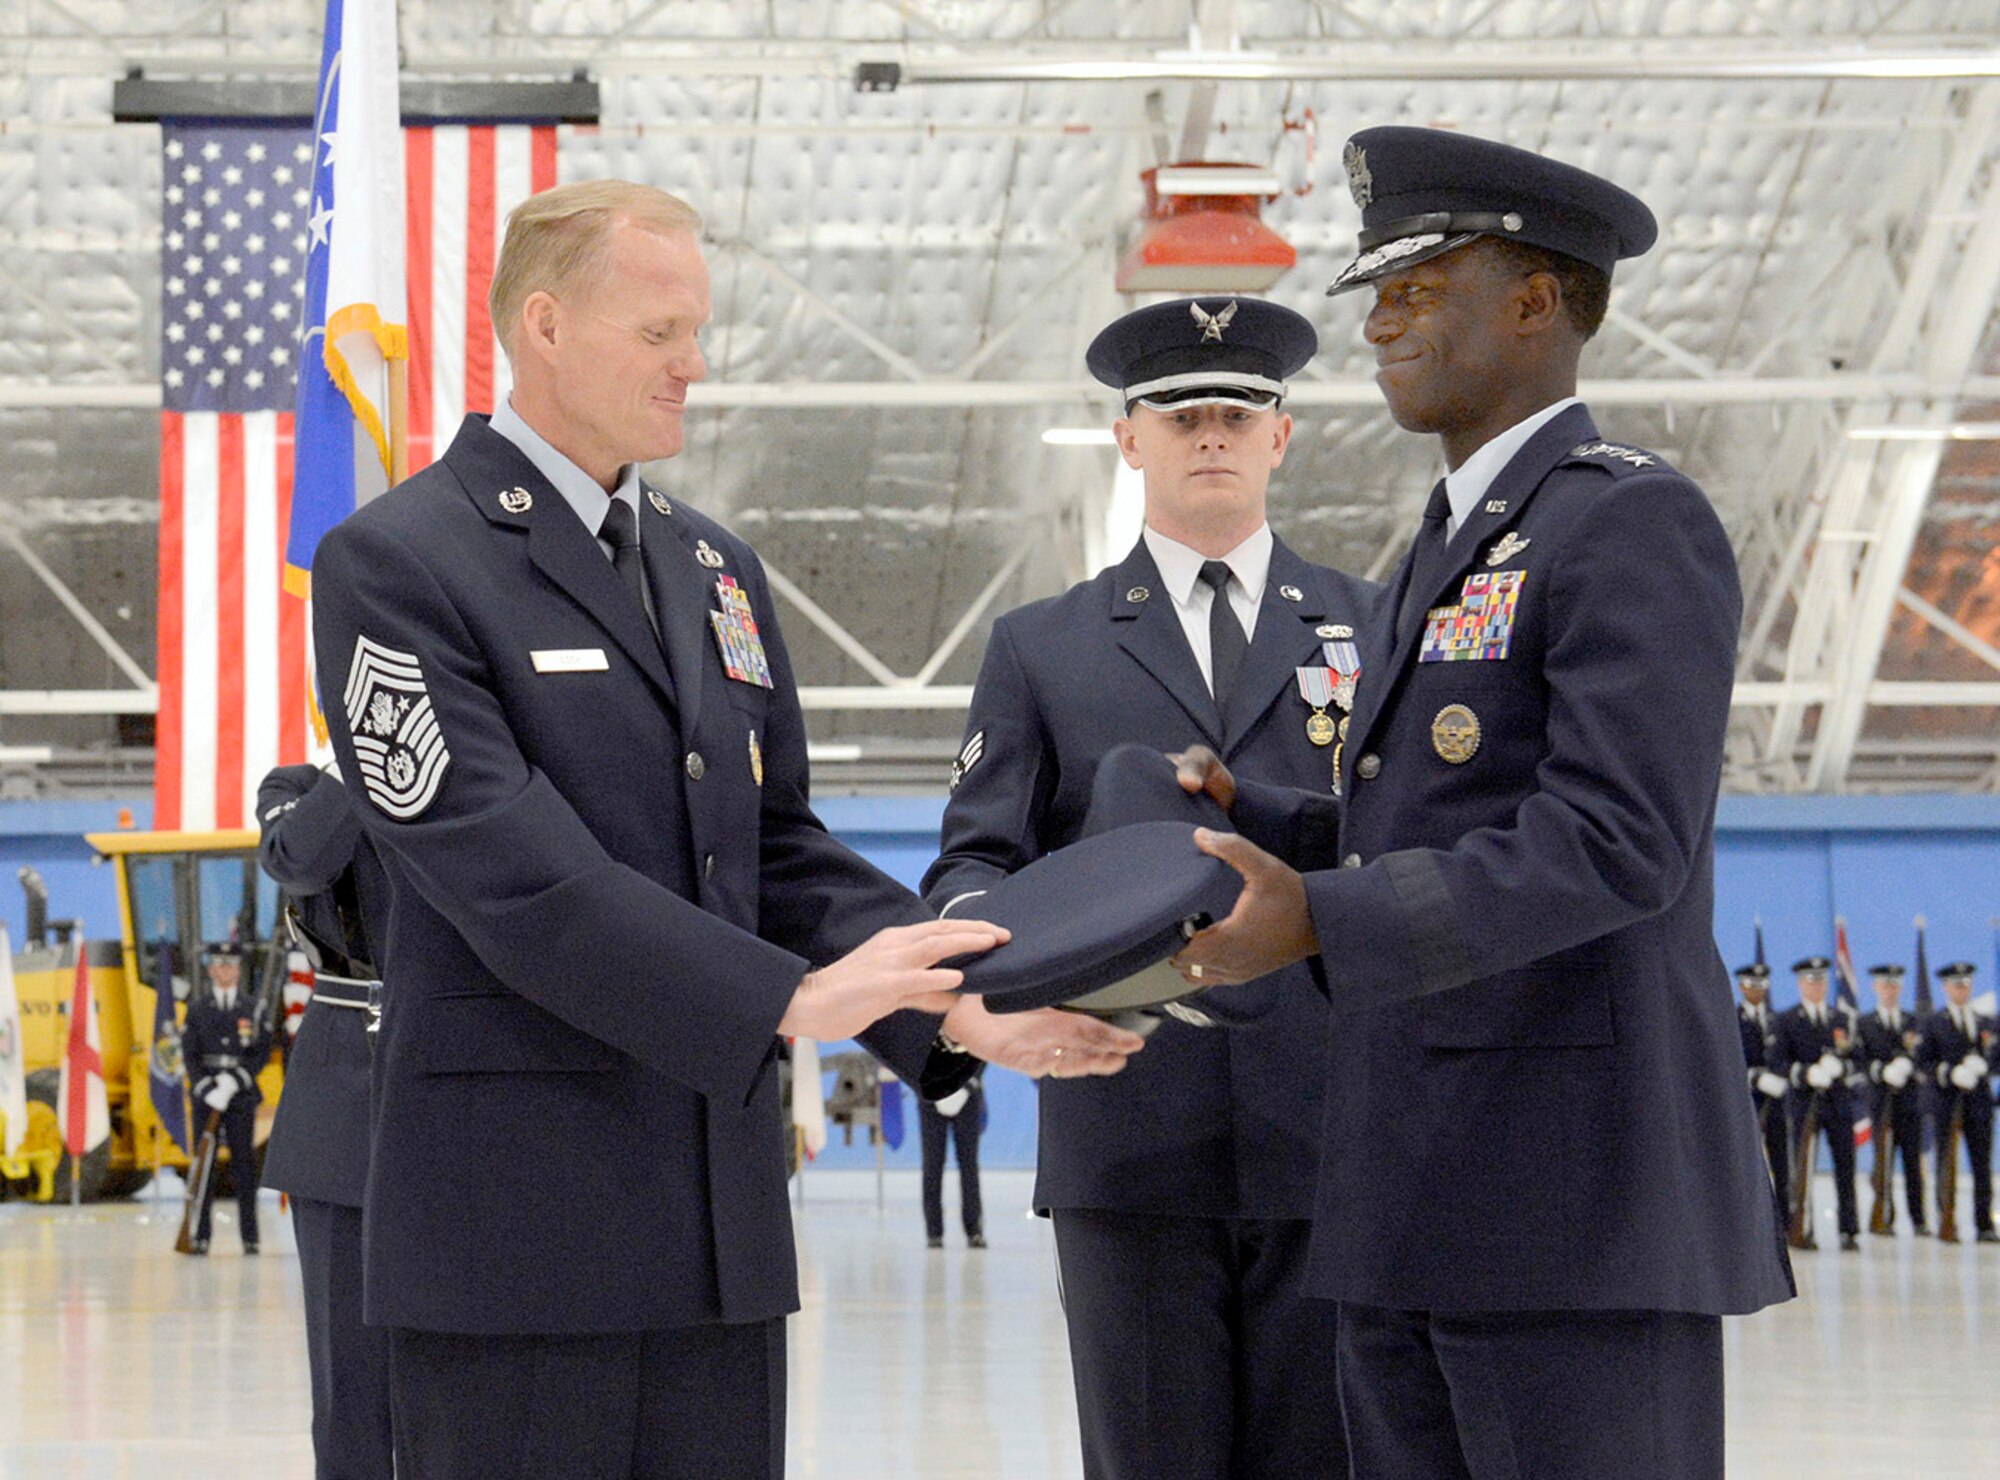 Chief Master Sgt. James Cody receives his wheel cap from Gen. Edward A. Rice Jr., commander of Air Education and Training Command during a transition ceremony at Joint Base Andrews, Md., on Jan 24, 2013.  Cody is the 17th chief master sergeant of the Air Force. (U.S. Air Force photo/Scott M. Ash)